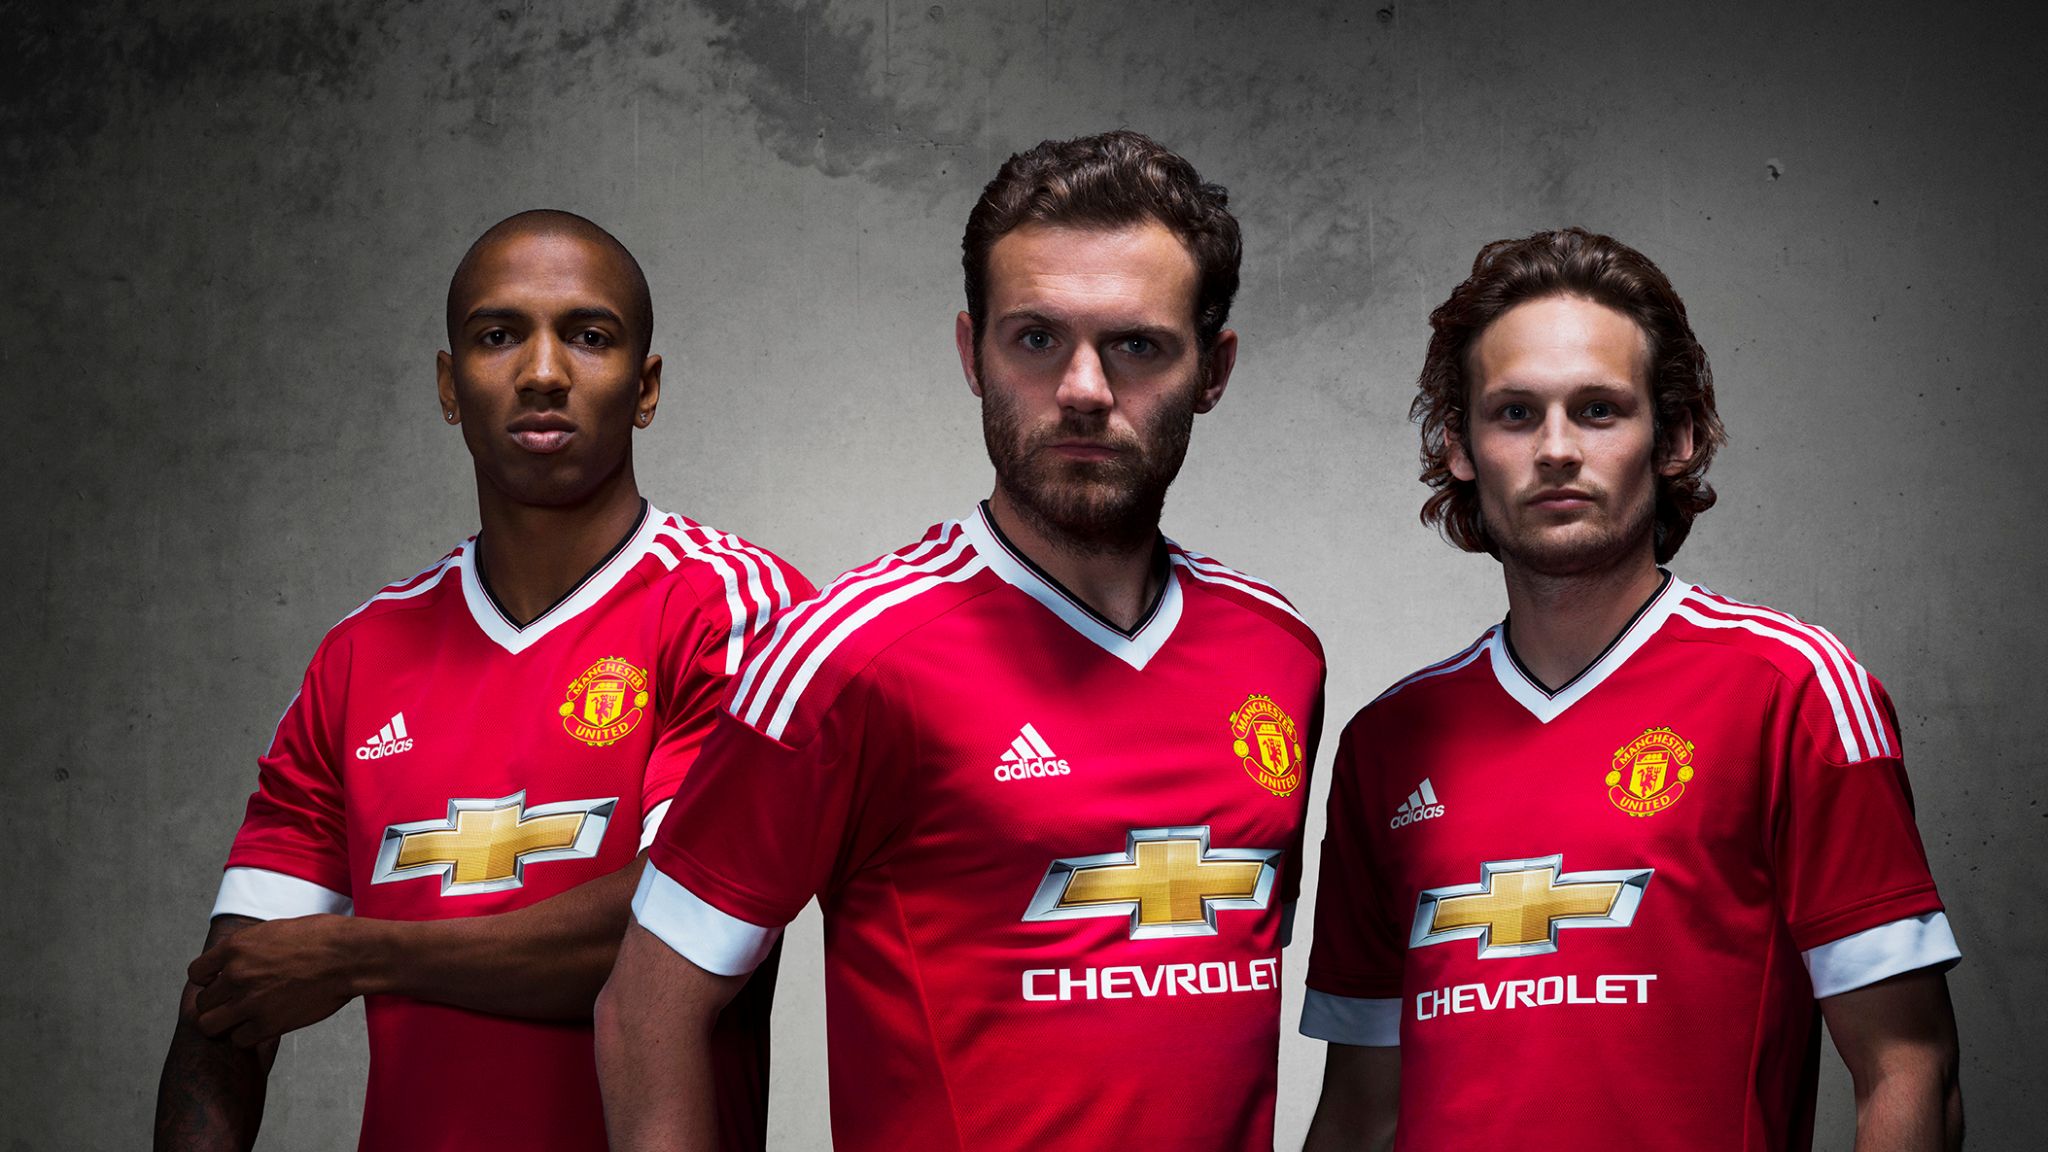 Lamme endnu engang smid væk Manchester United unveil new adidas kit for 2015/16 season | Football News  | Sky Sports